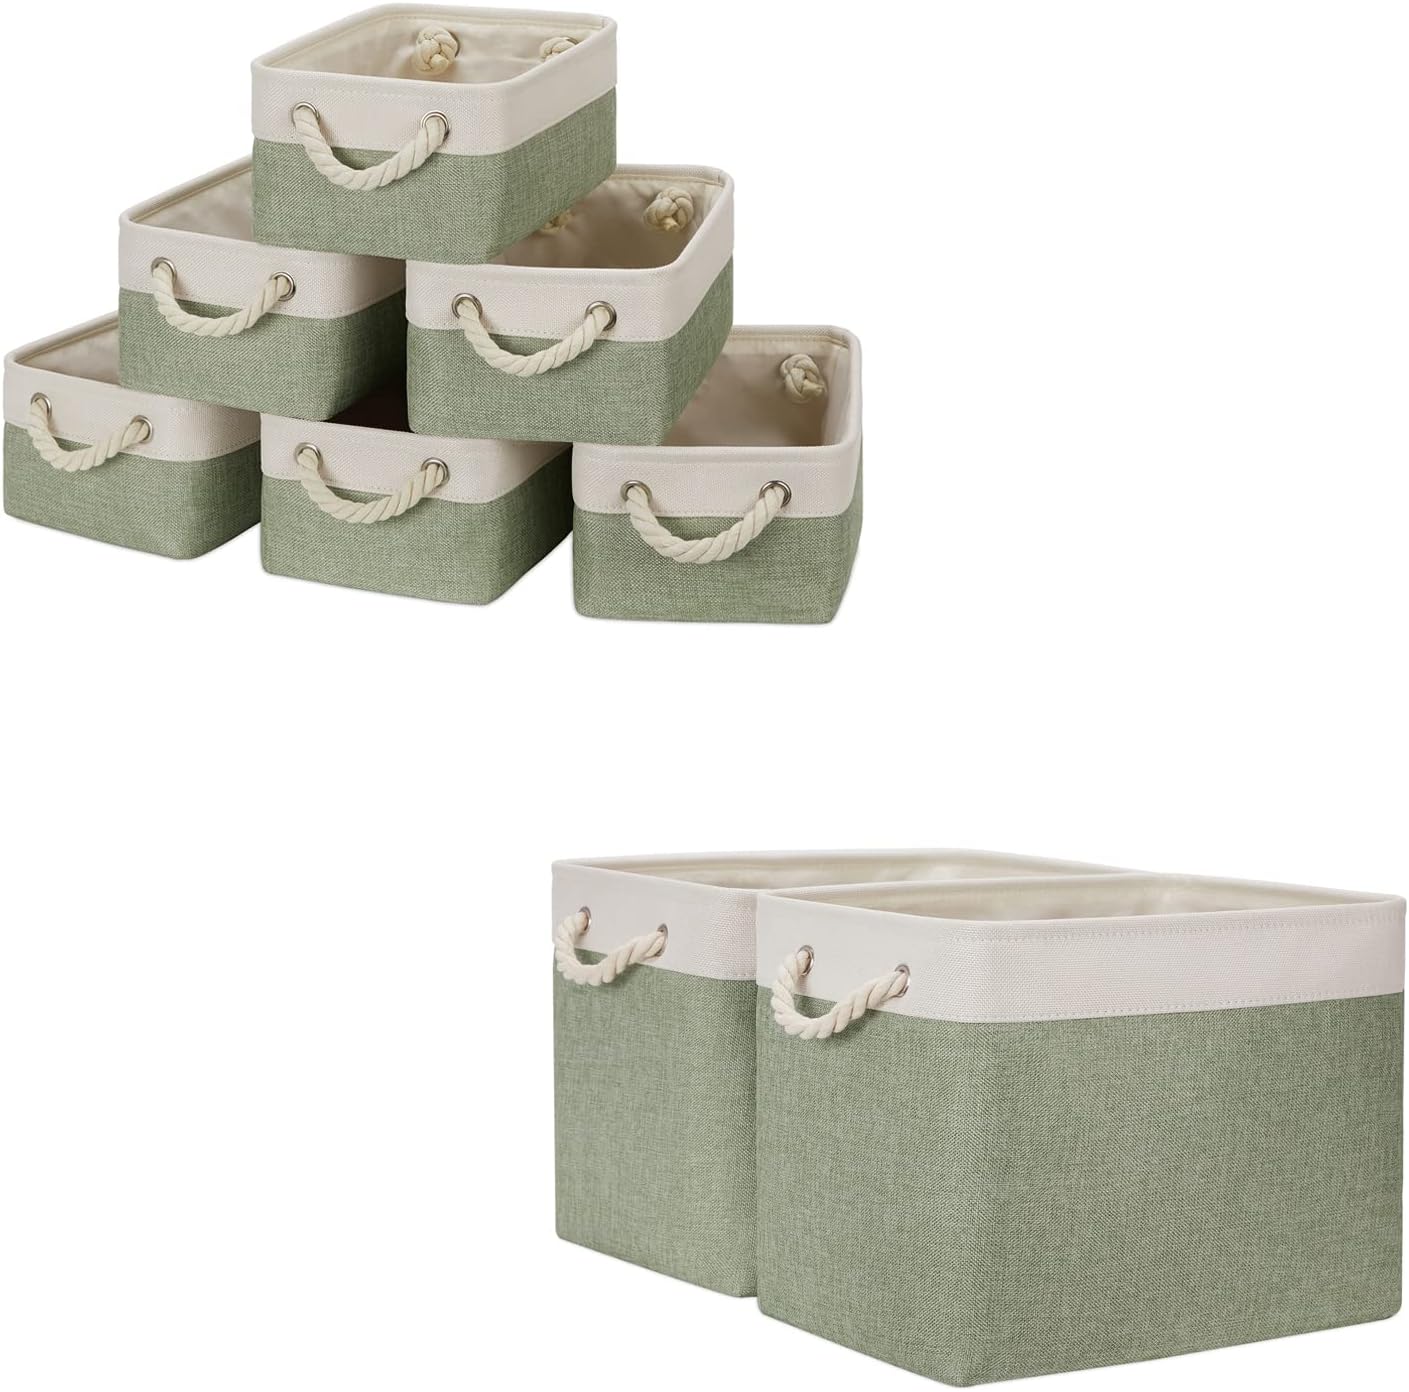 Temary Baskets 6 Pcs Fabric Storage Bins for Shelves Bundled with 2 Fabric Storage Basket for Organizing Nursery, Home (White&Green, 11.8Lx7.9Wx5.3H Inches, 16Lx12Wx12H Inches)